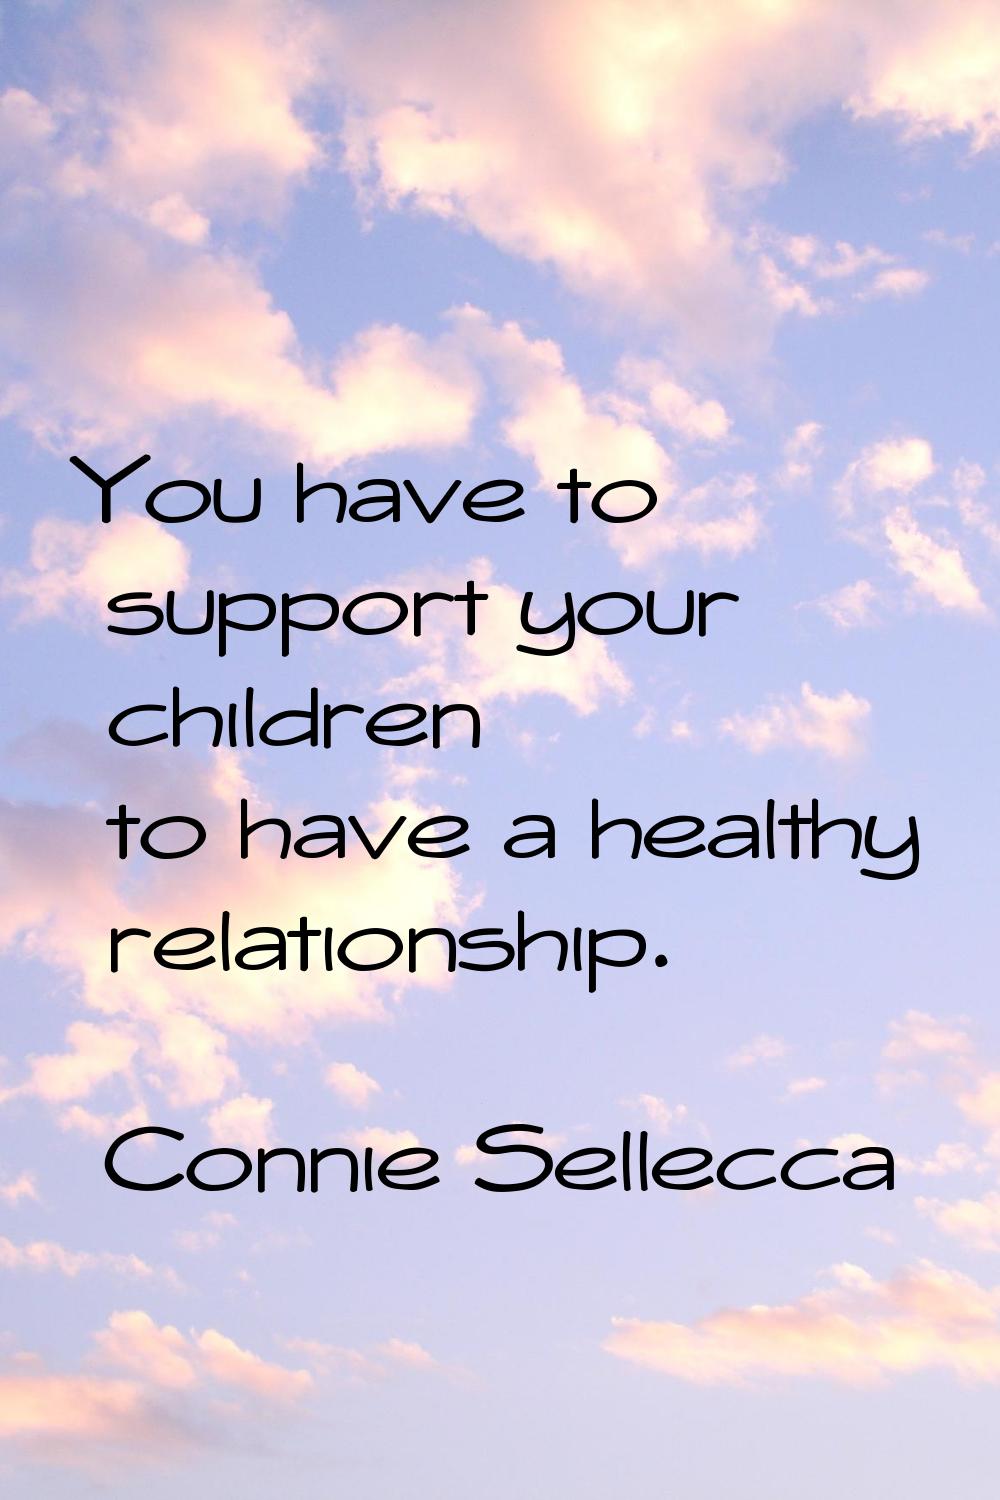 You have to support your children to have a healthy relationship.